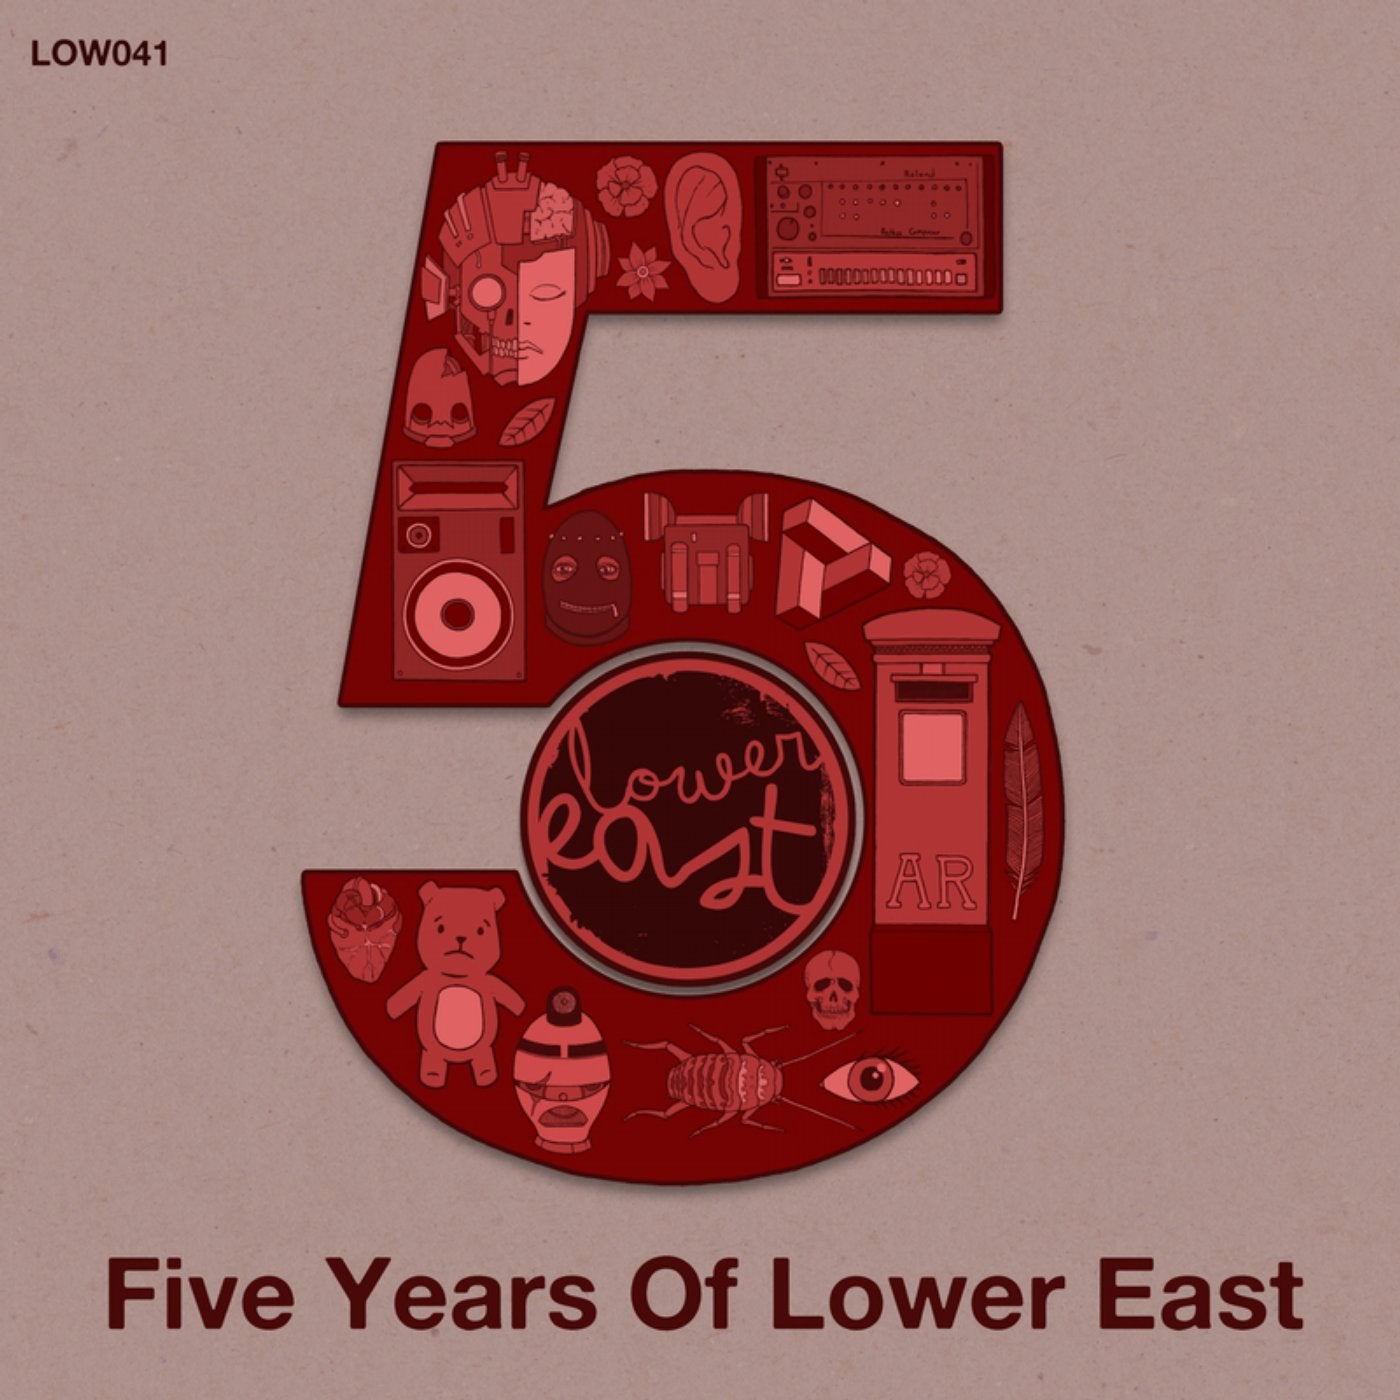 5 Years of Lower East